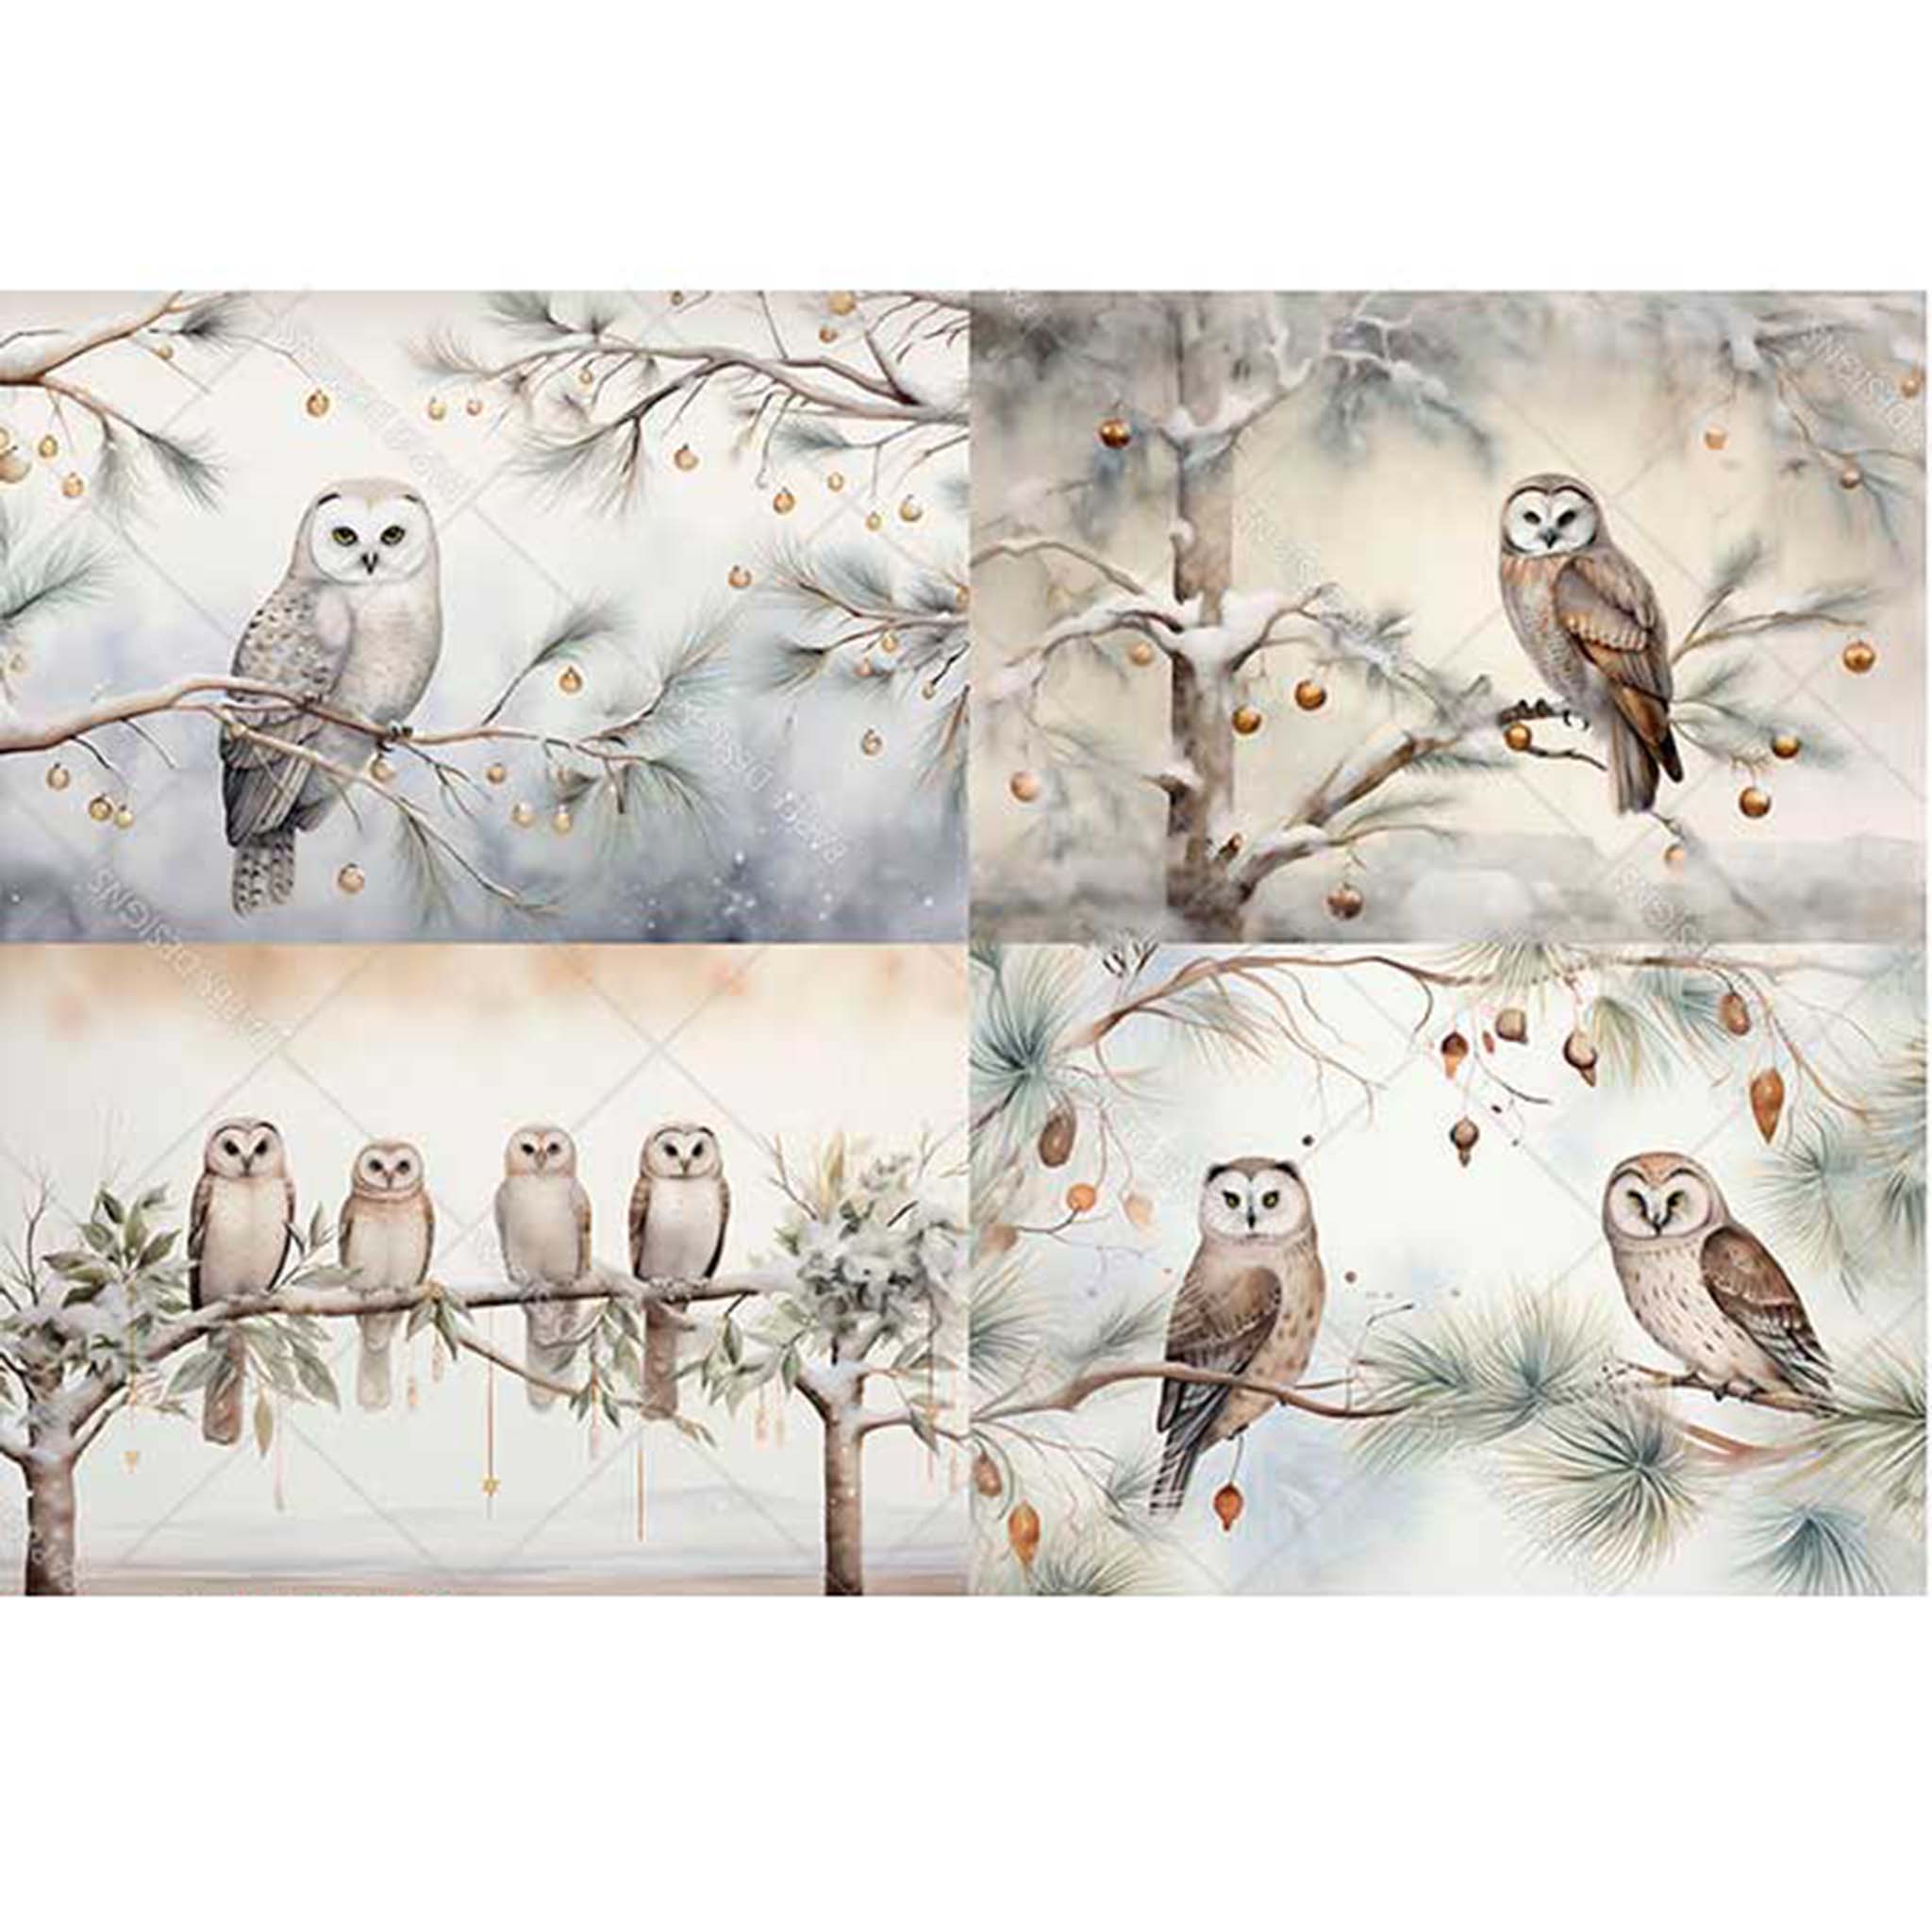 A3 rice paper design featuring 4 scenes of owls perched on snowy tree branches.